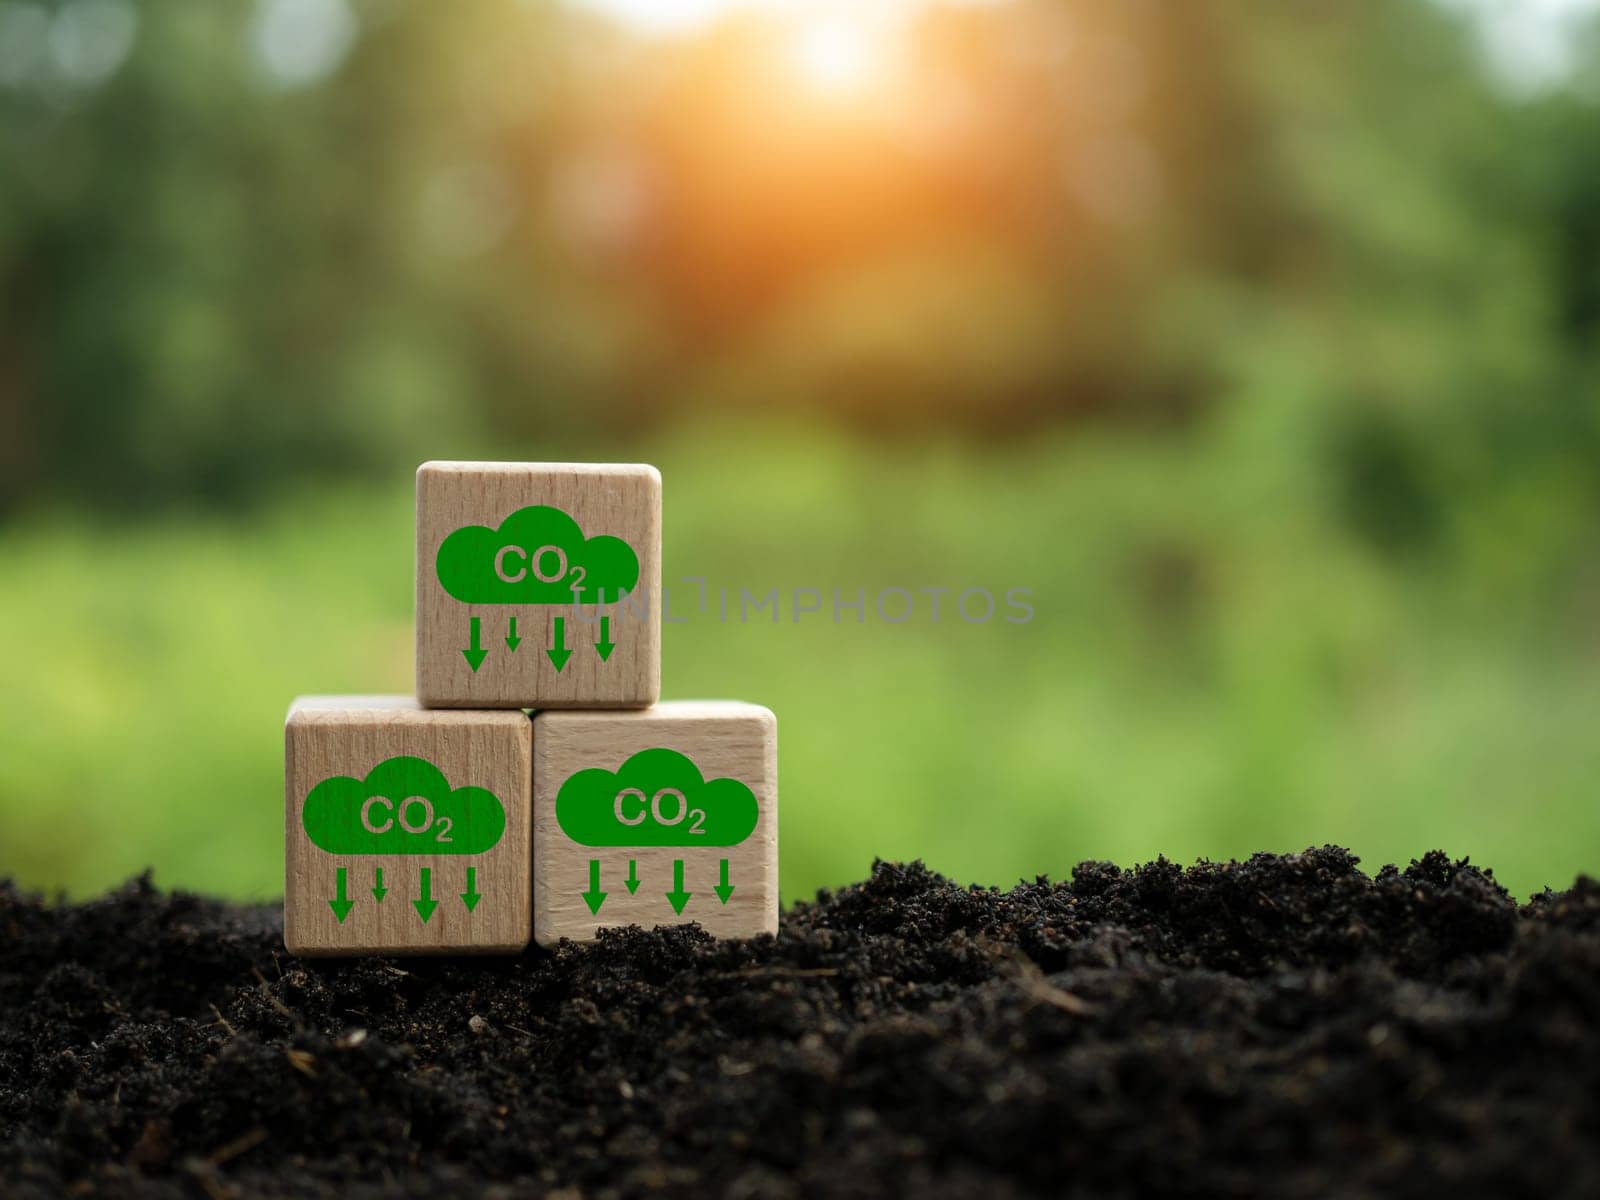 CO2 emission reduction concept, clean and friendly environment without carbon dioxide emissions. Planting trees to reduce CO2 emissions, environmental protection concept. by Unimages2527